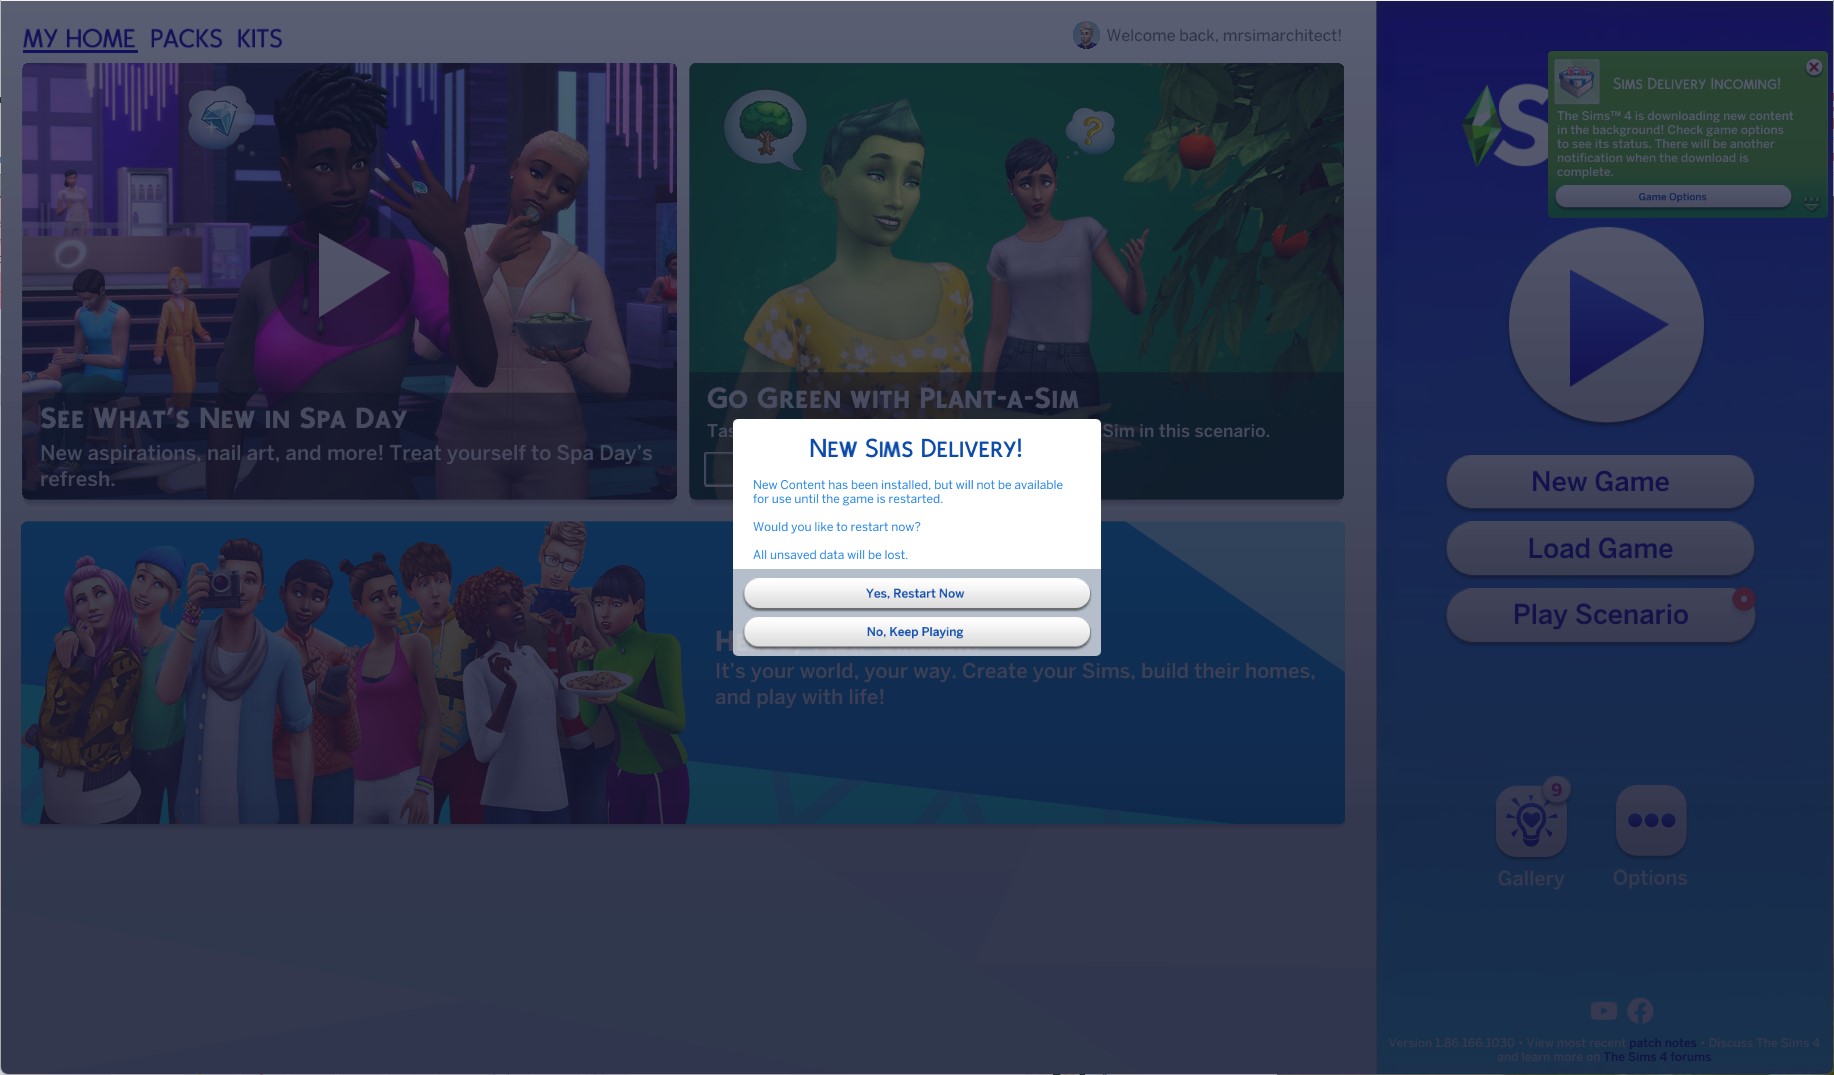 The Sims 4 Delivery Express 8.0.2 - June 15, 2022 - The Sim Architect